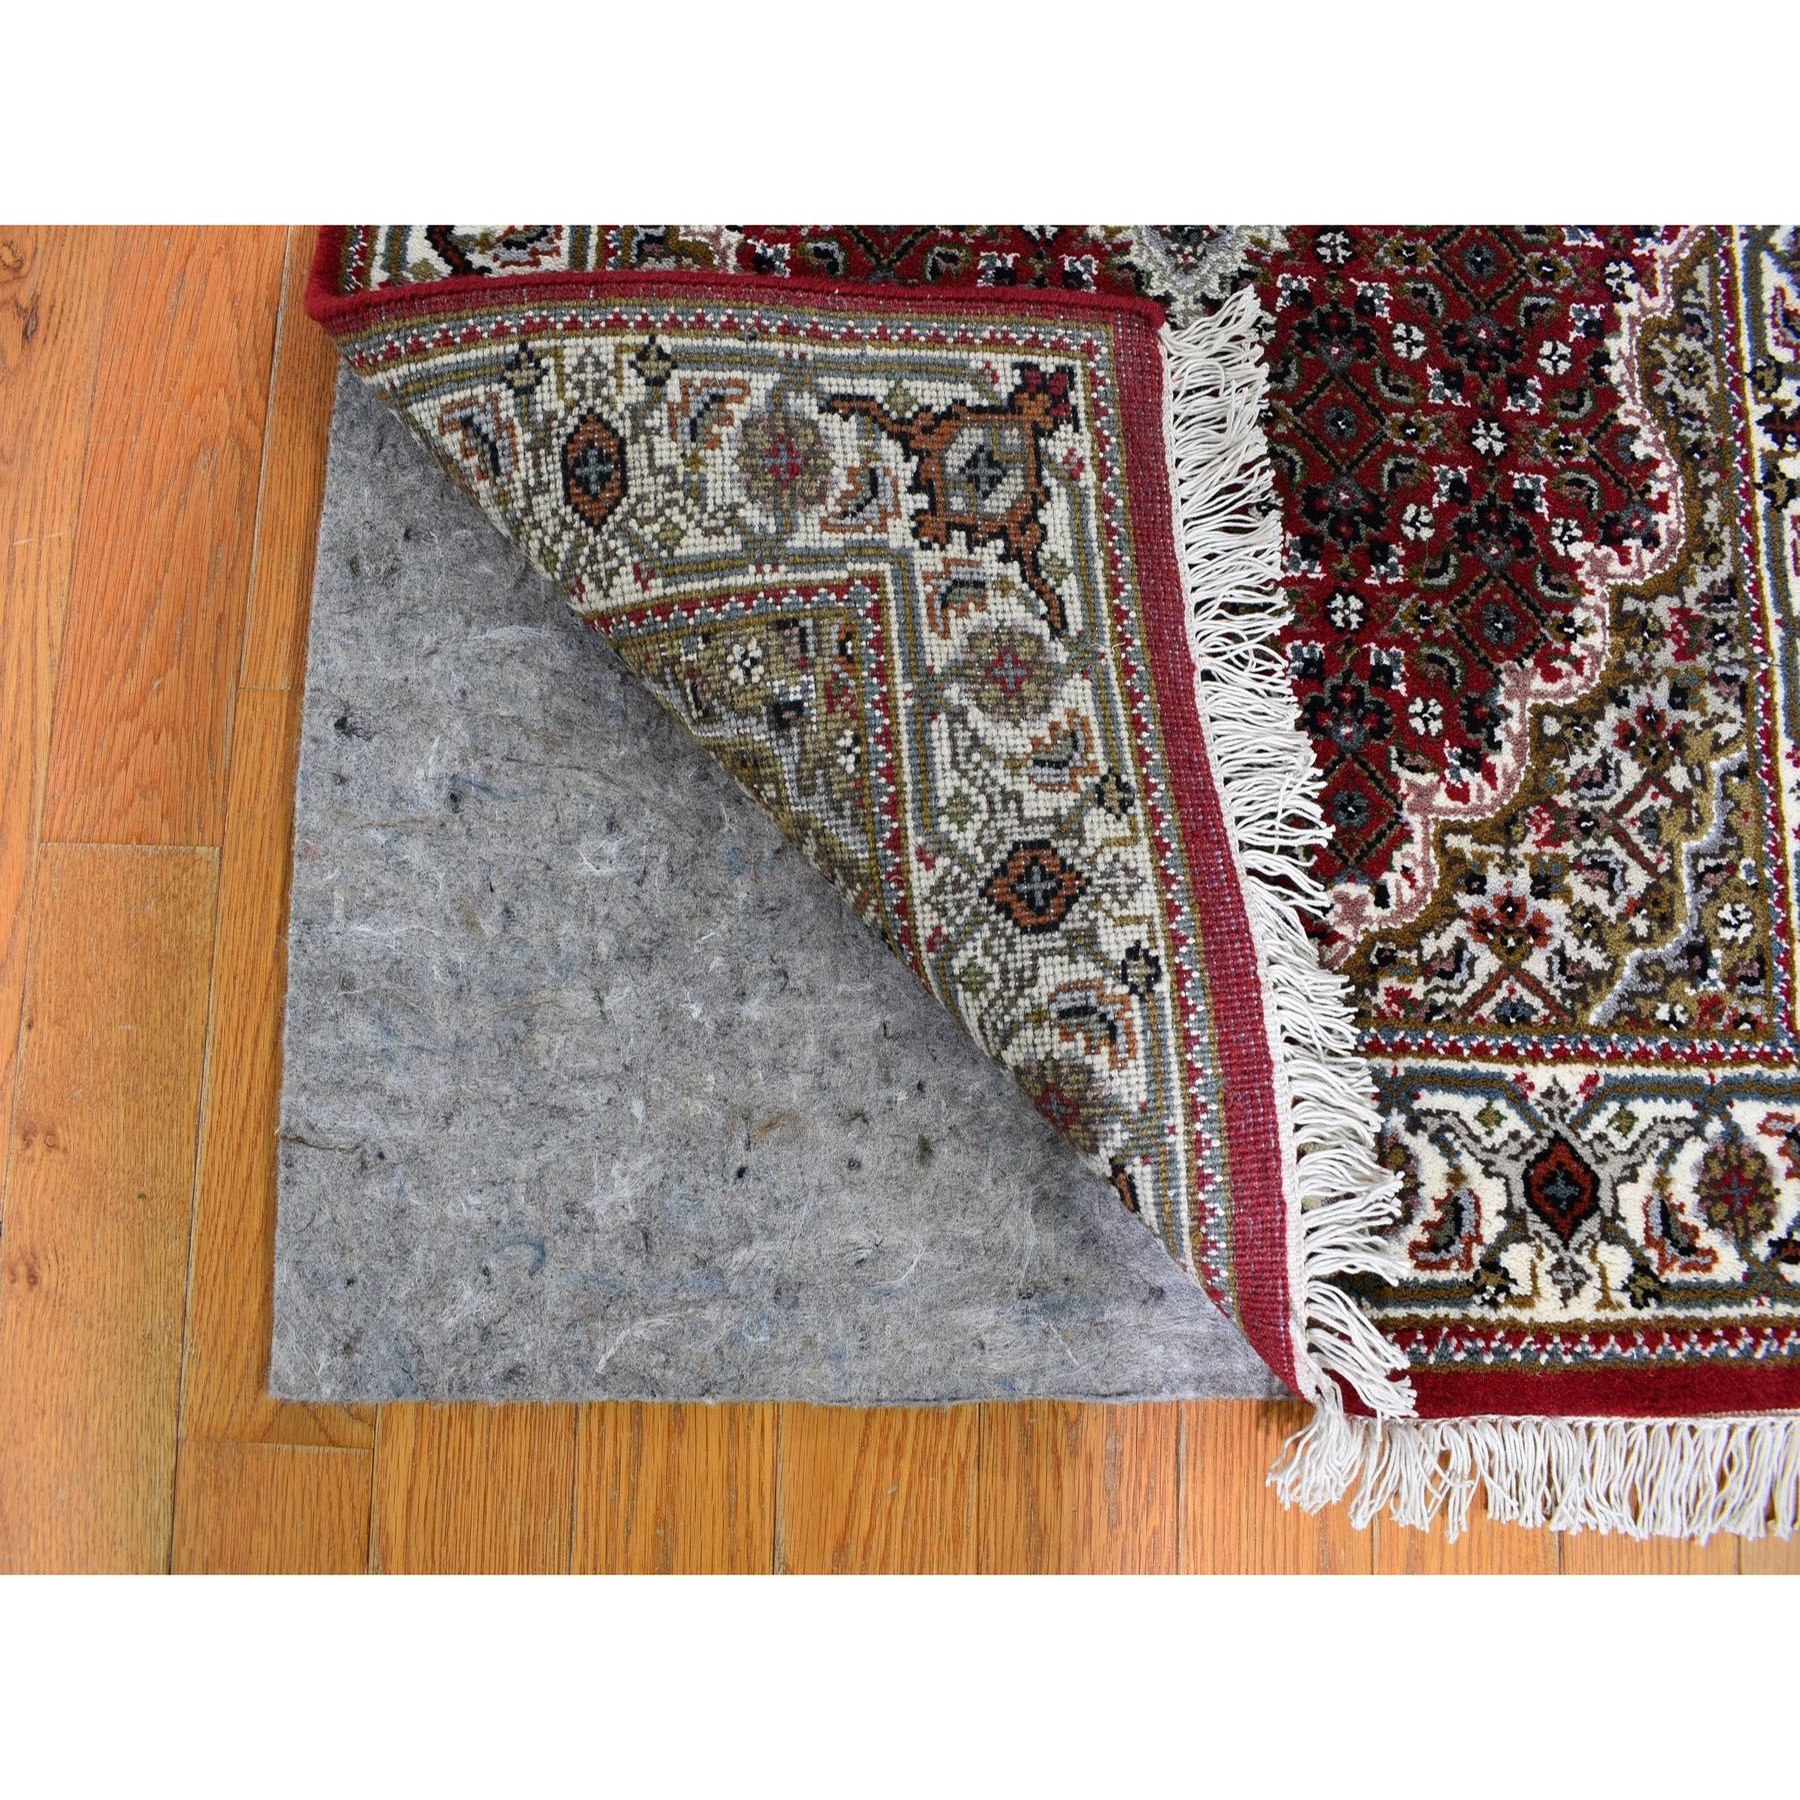 2-7 x8-4  Red Tabriz Mahi Wool And Silk Runner Hand Knotted Oriental Rug 